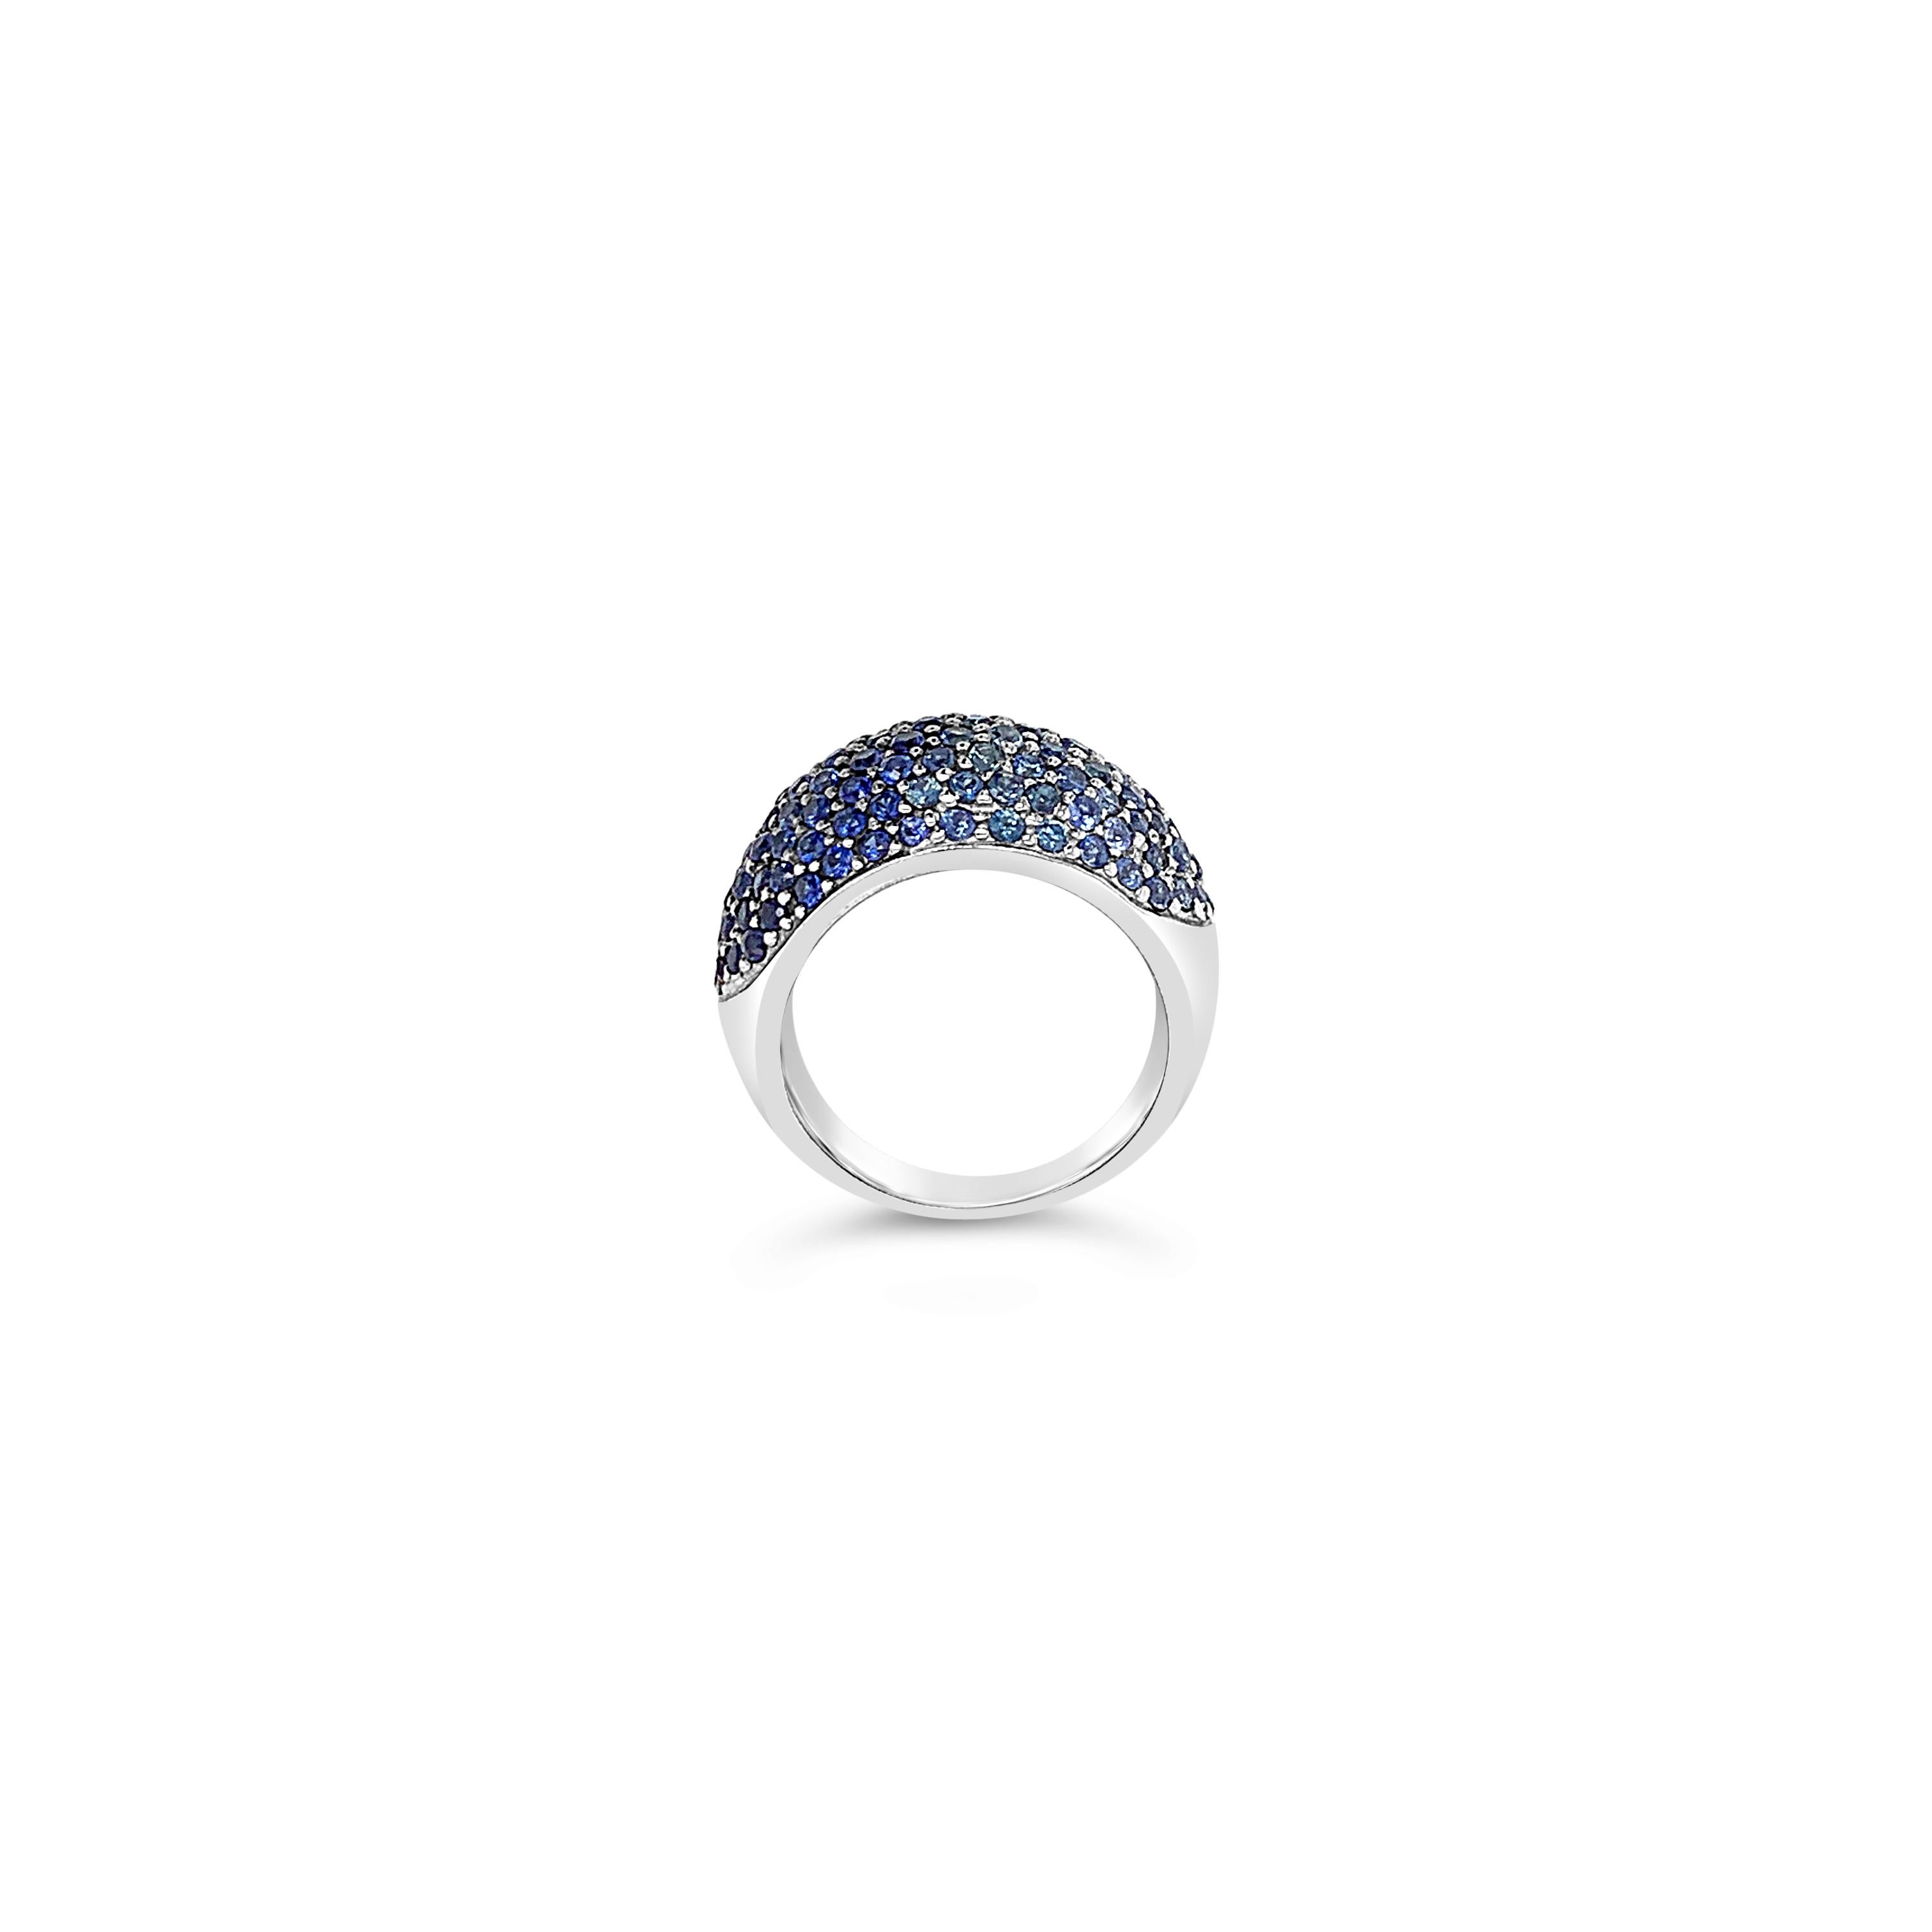 Carlo Viani® Ring featuring 2 1/3 cts. Blueberry Sapphire™, set in 14K Vanilla Gold®. Please feel free to reach out with any questions! Item comes with a Carlo Viani® suede pouch! Ring Size 5.5. Ring may or  may not be sizable.
